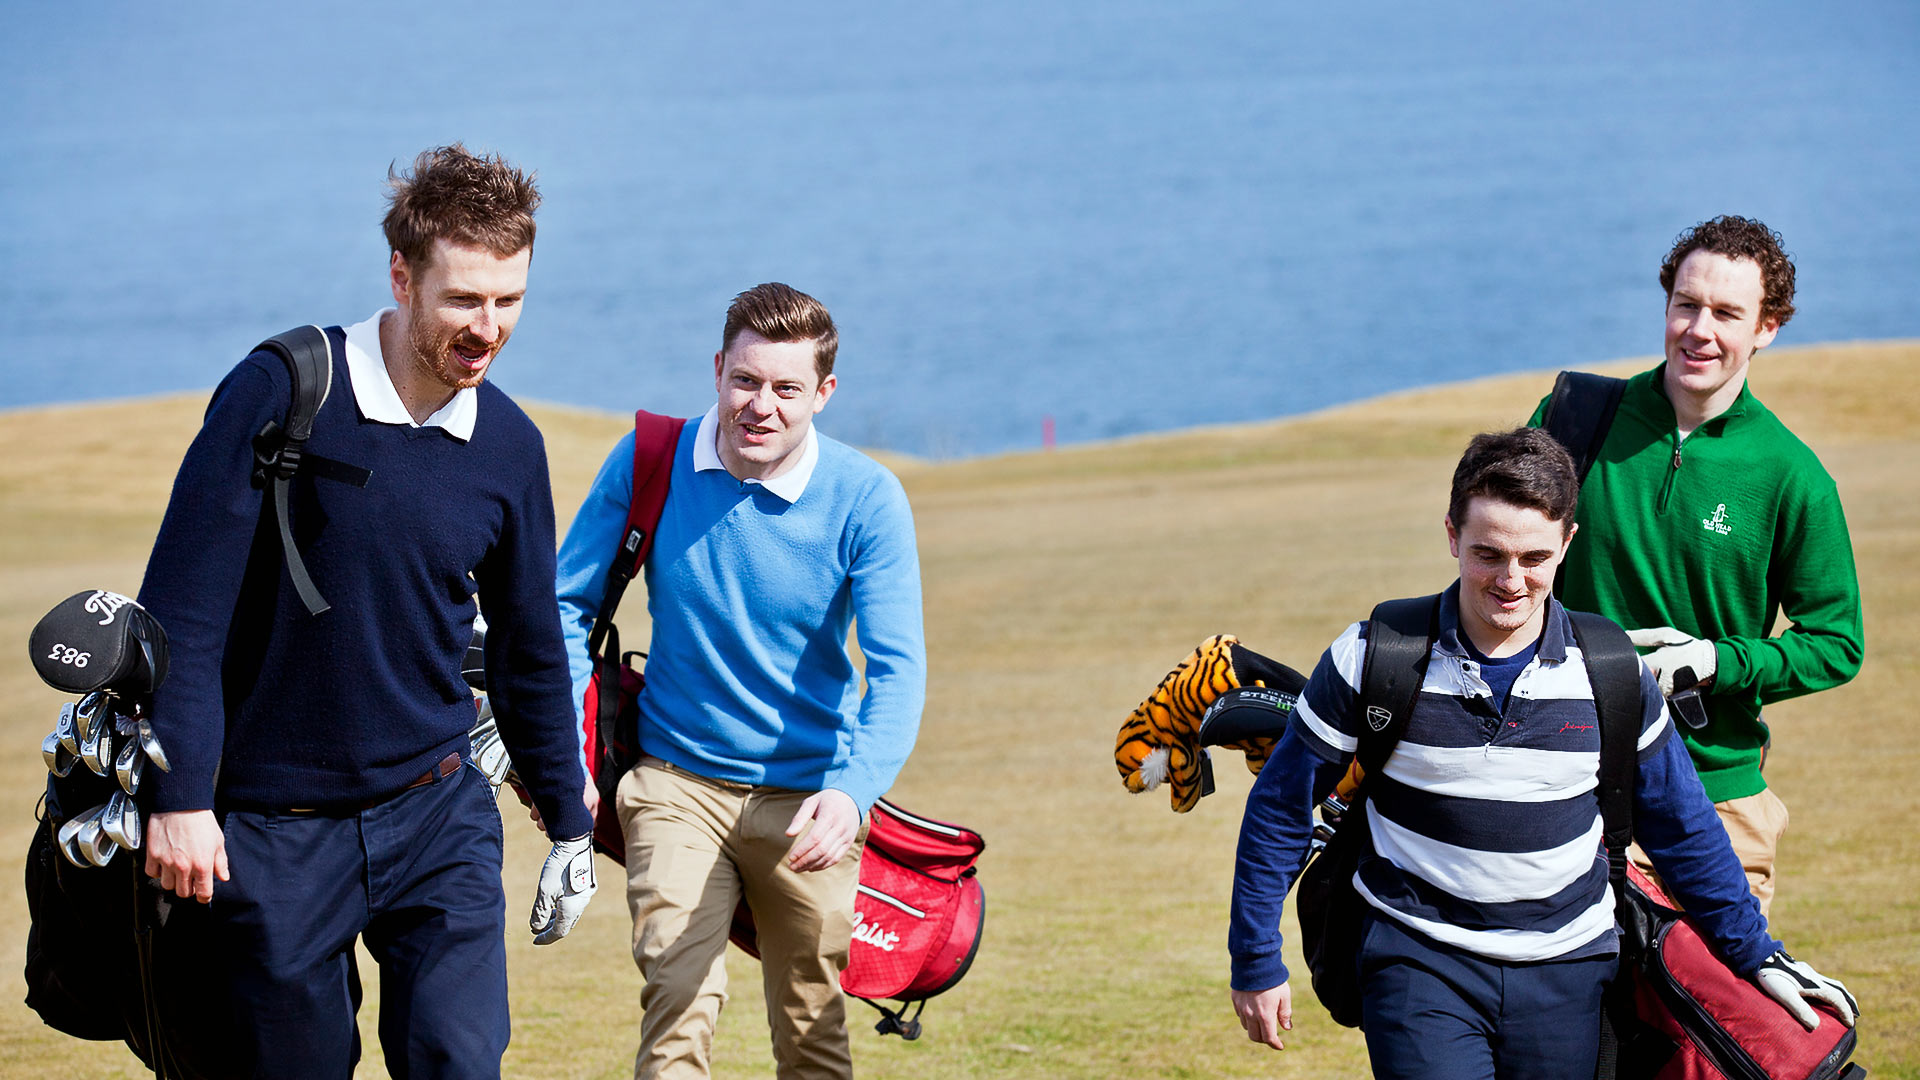 A group of people carry golf bags and clubs for a game of golf in Cork